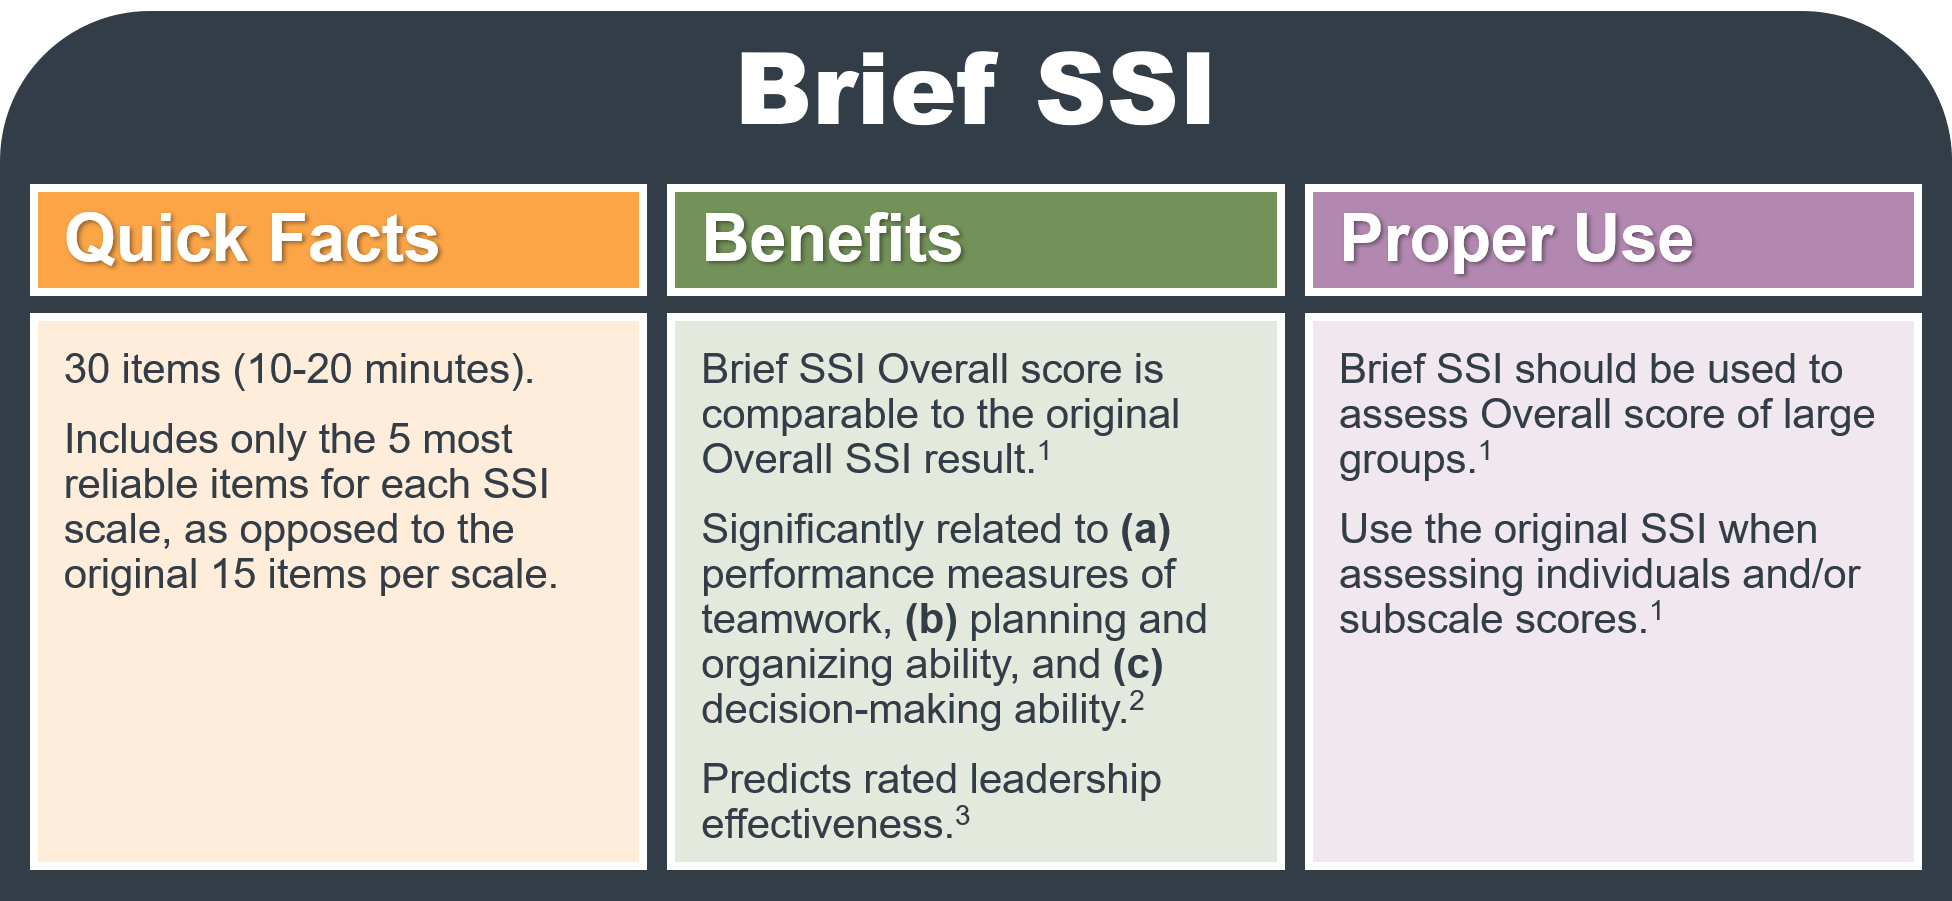 Brief SSI Facts, Benefits, and Proper Use